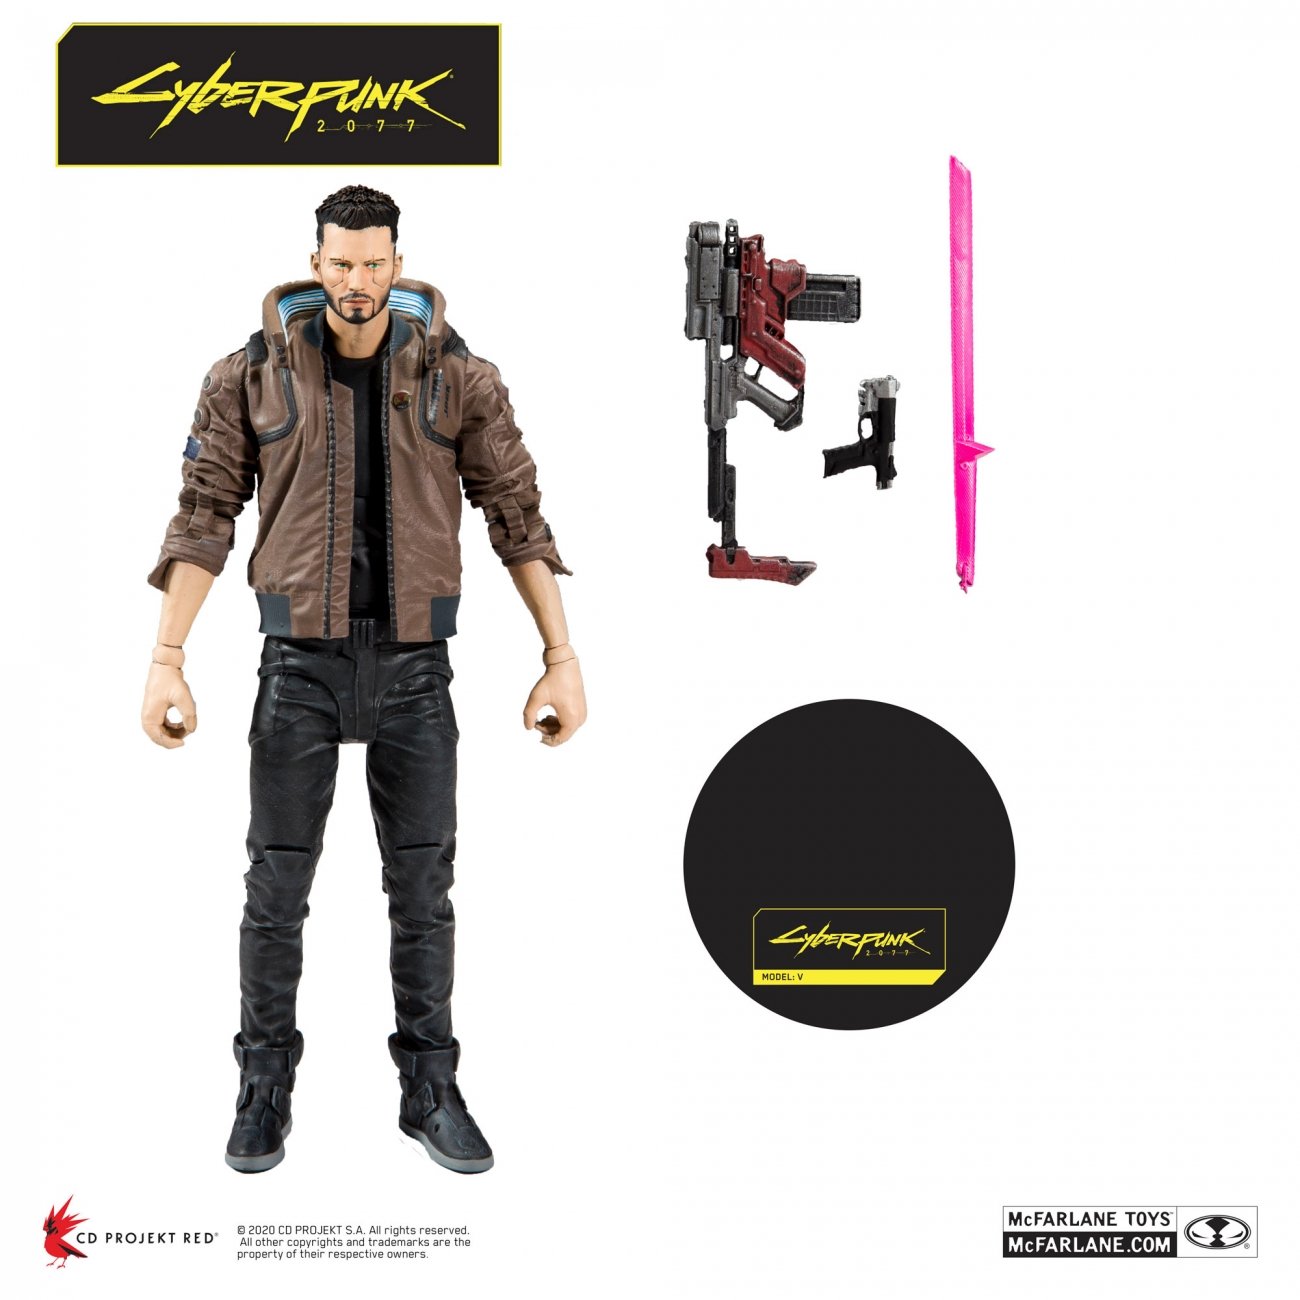 McFarlane Toys Cyberpunk 2077 Johnny Silverhand Action Figure 2020 for sale online 